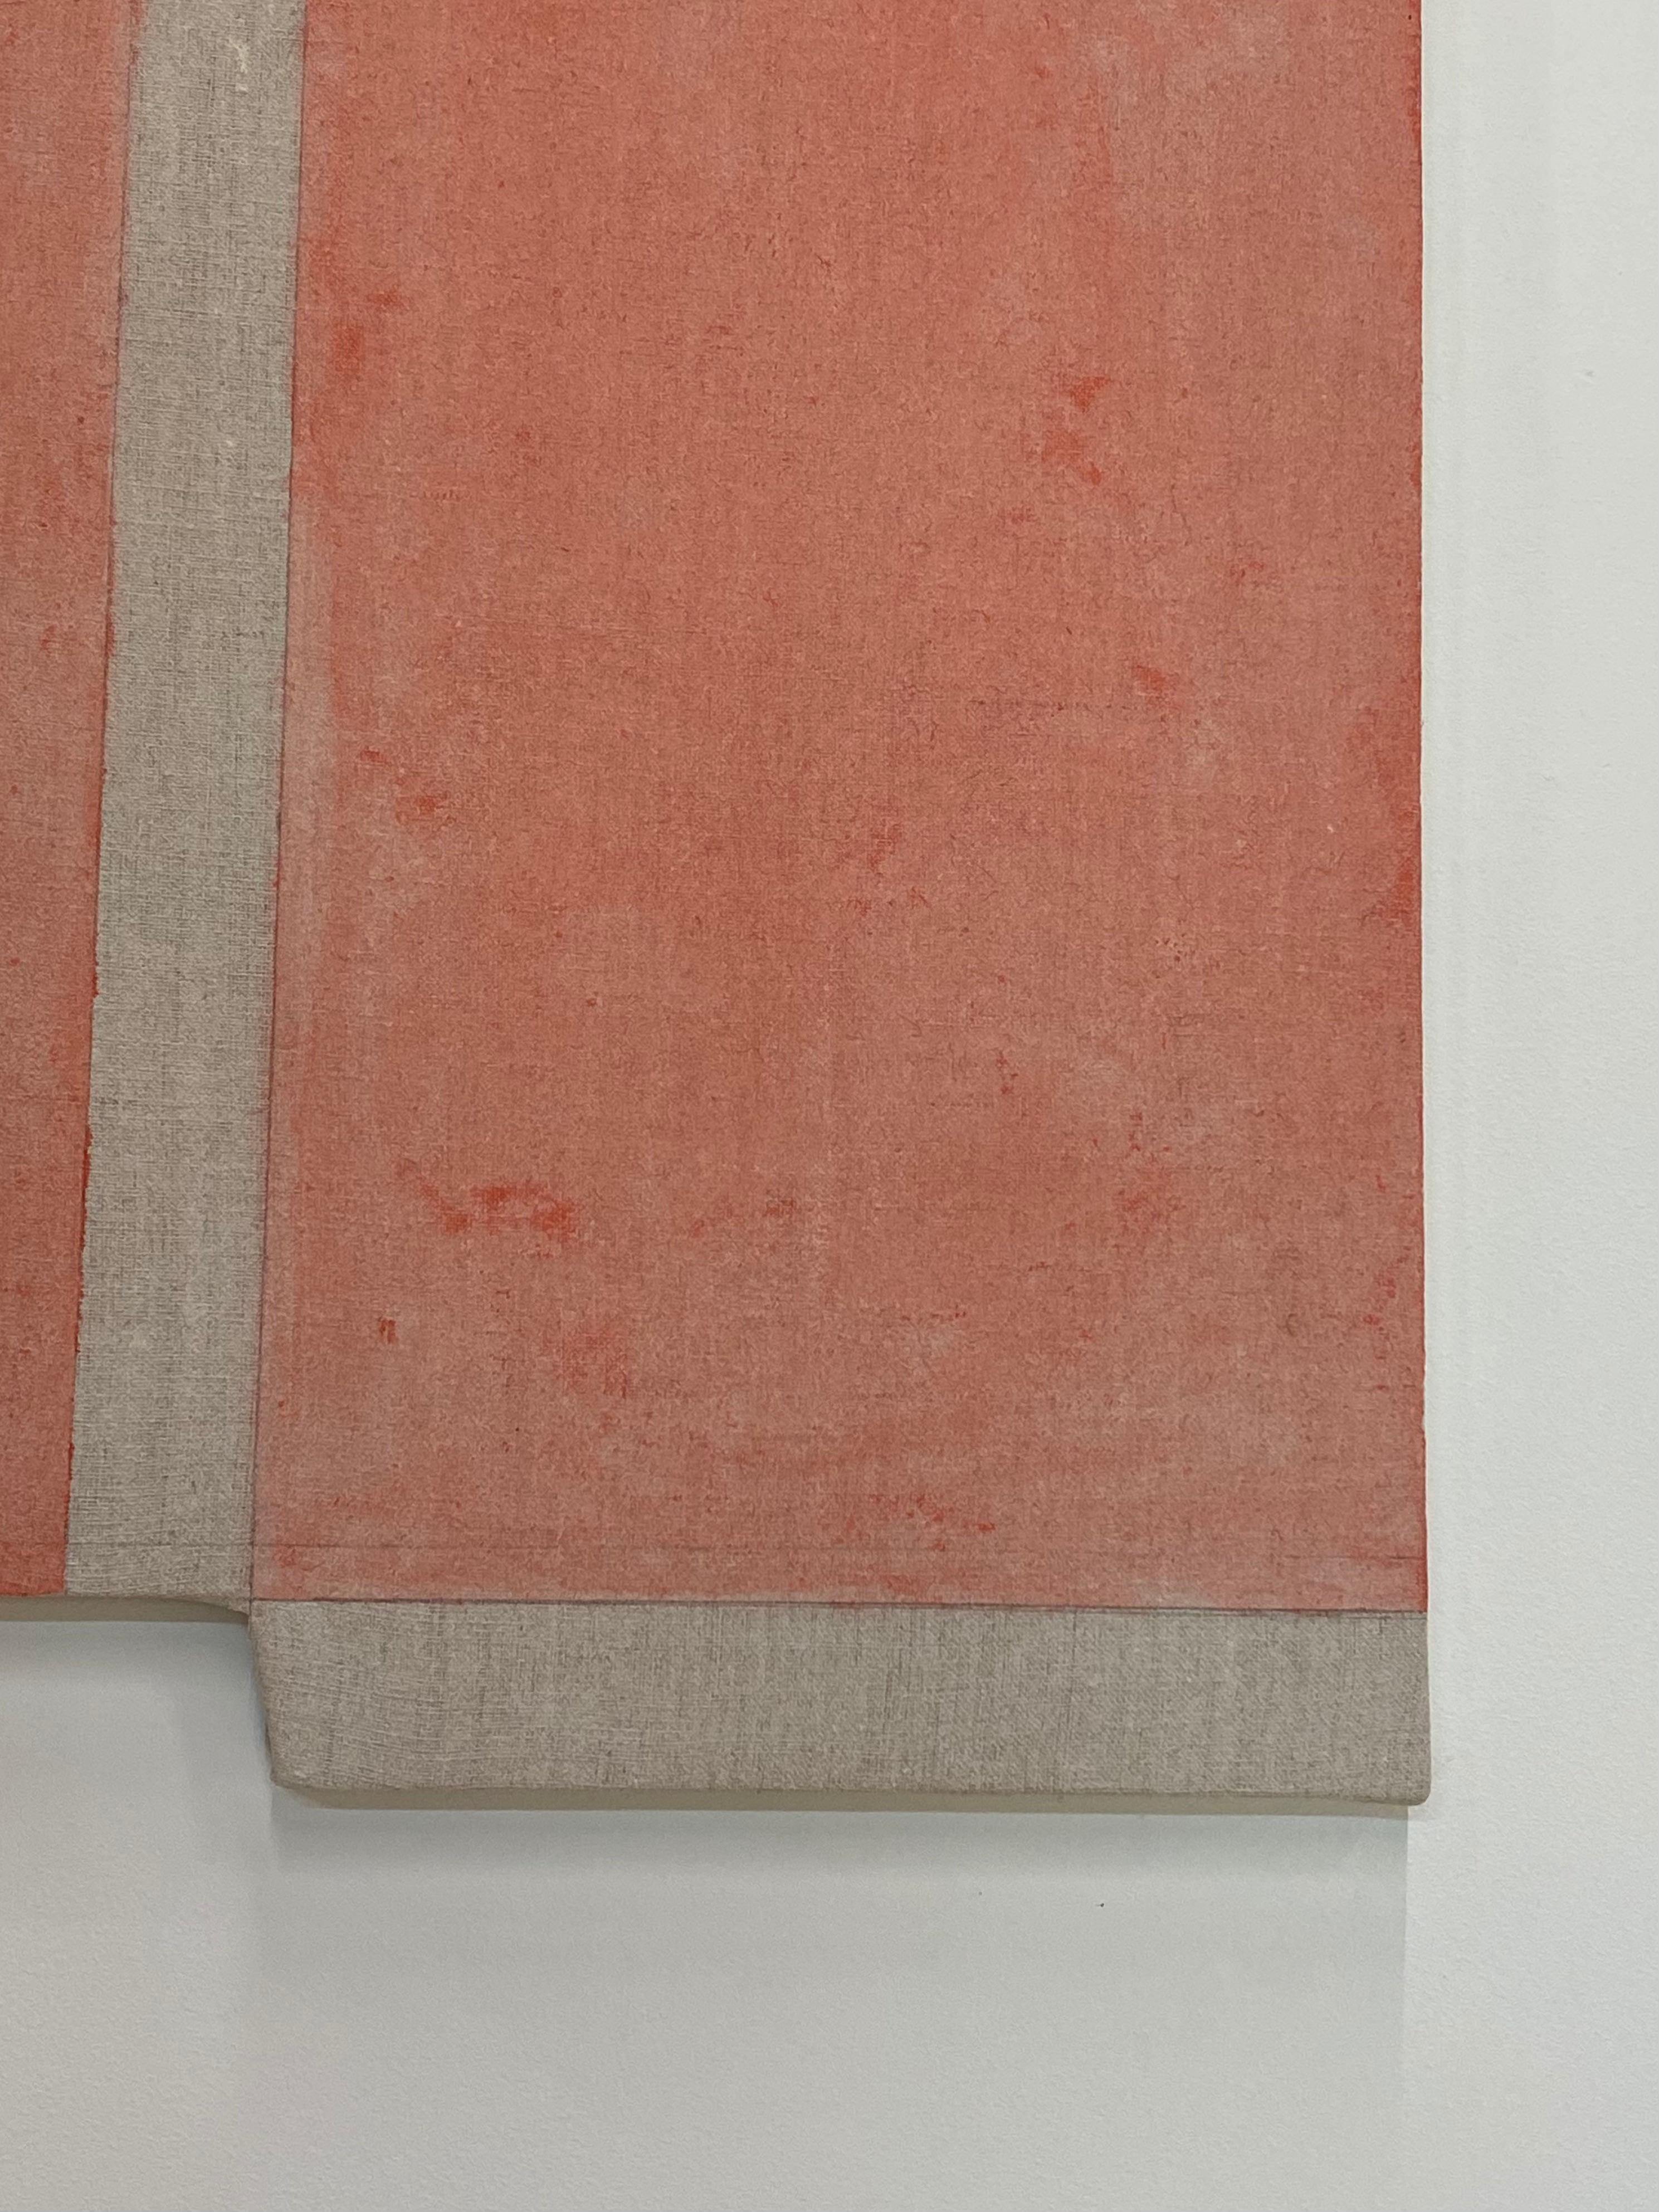 Cinnabar, Geometric Abstract, Coral Orange and Beige, Shaped Panel 3